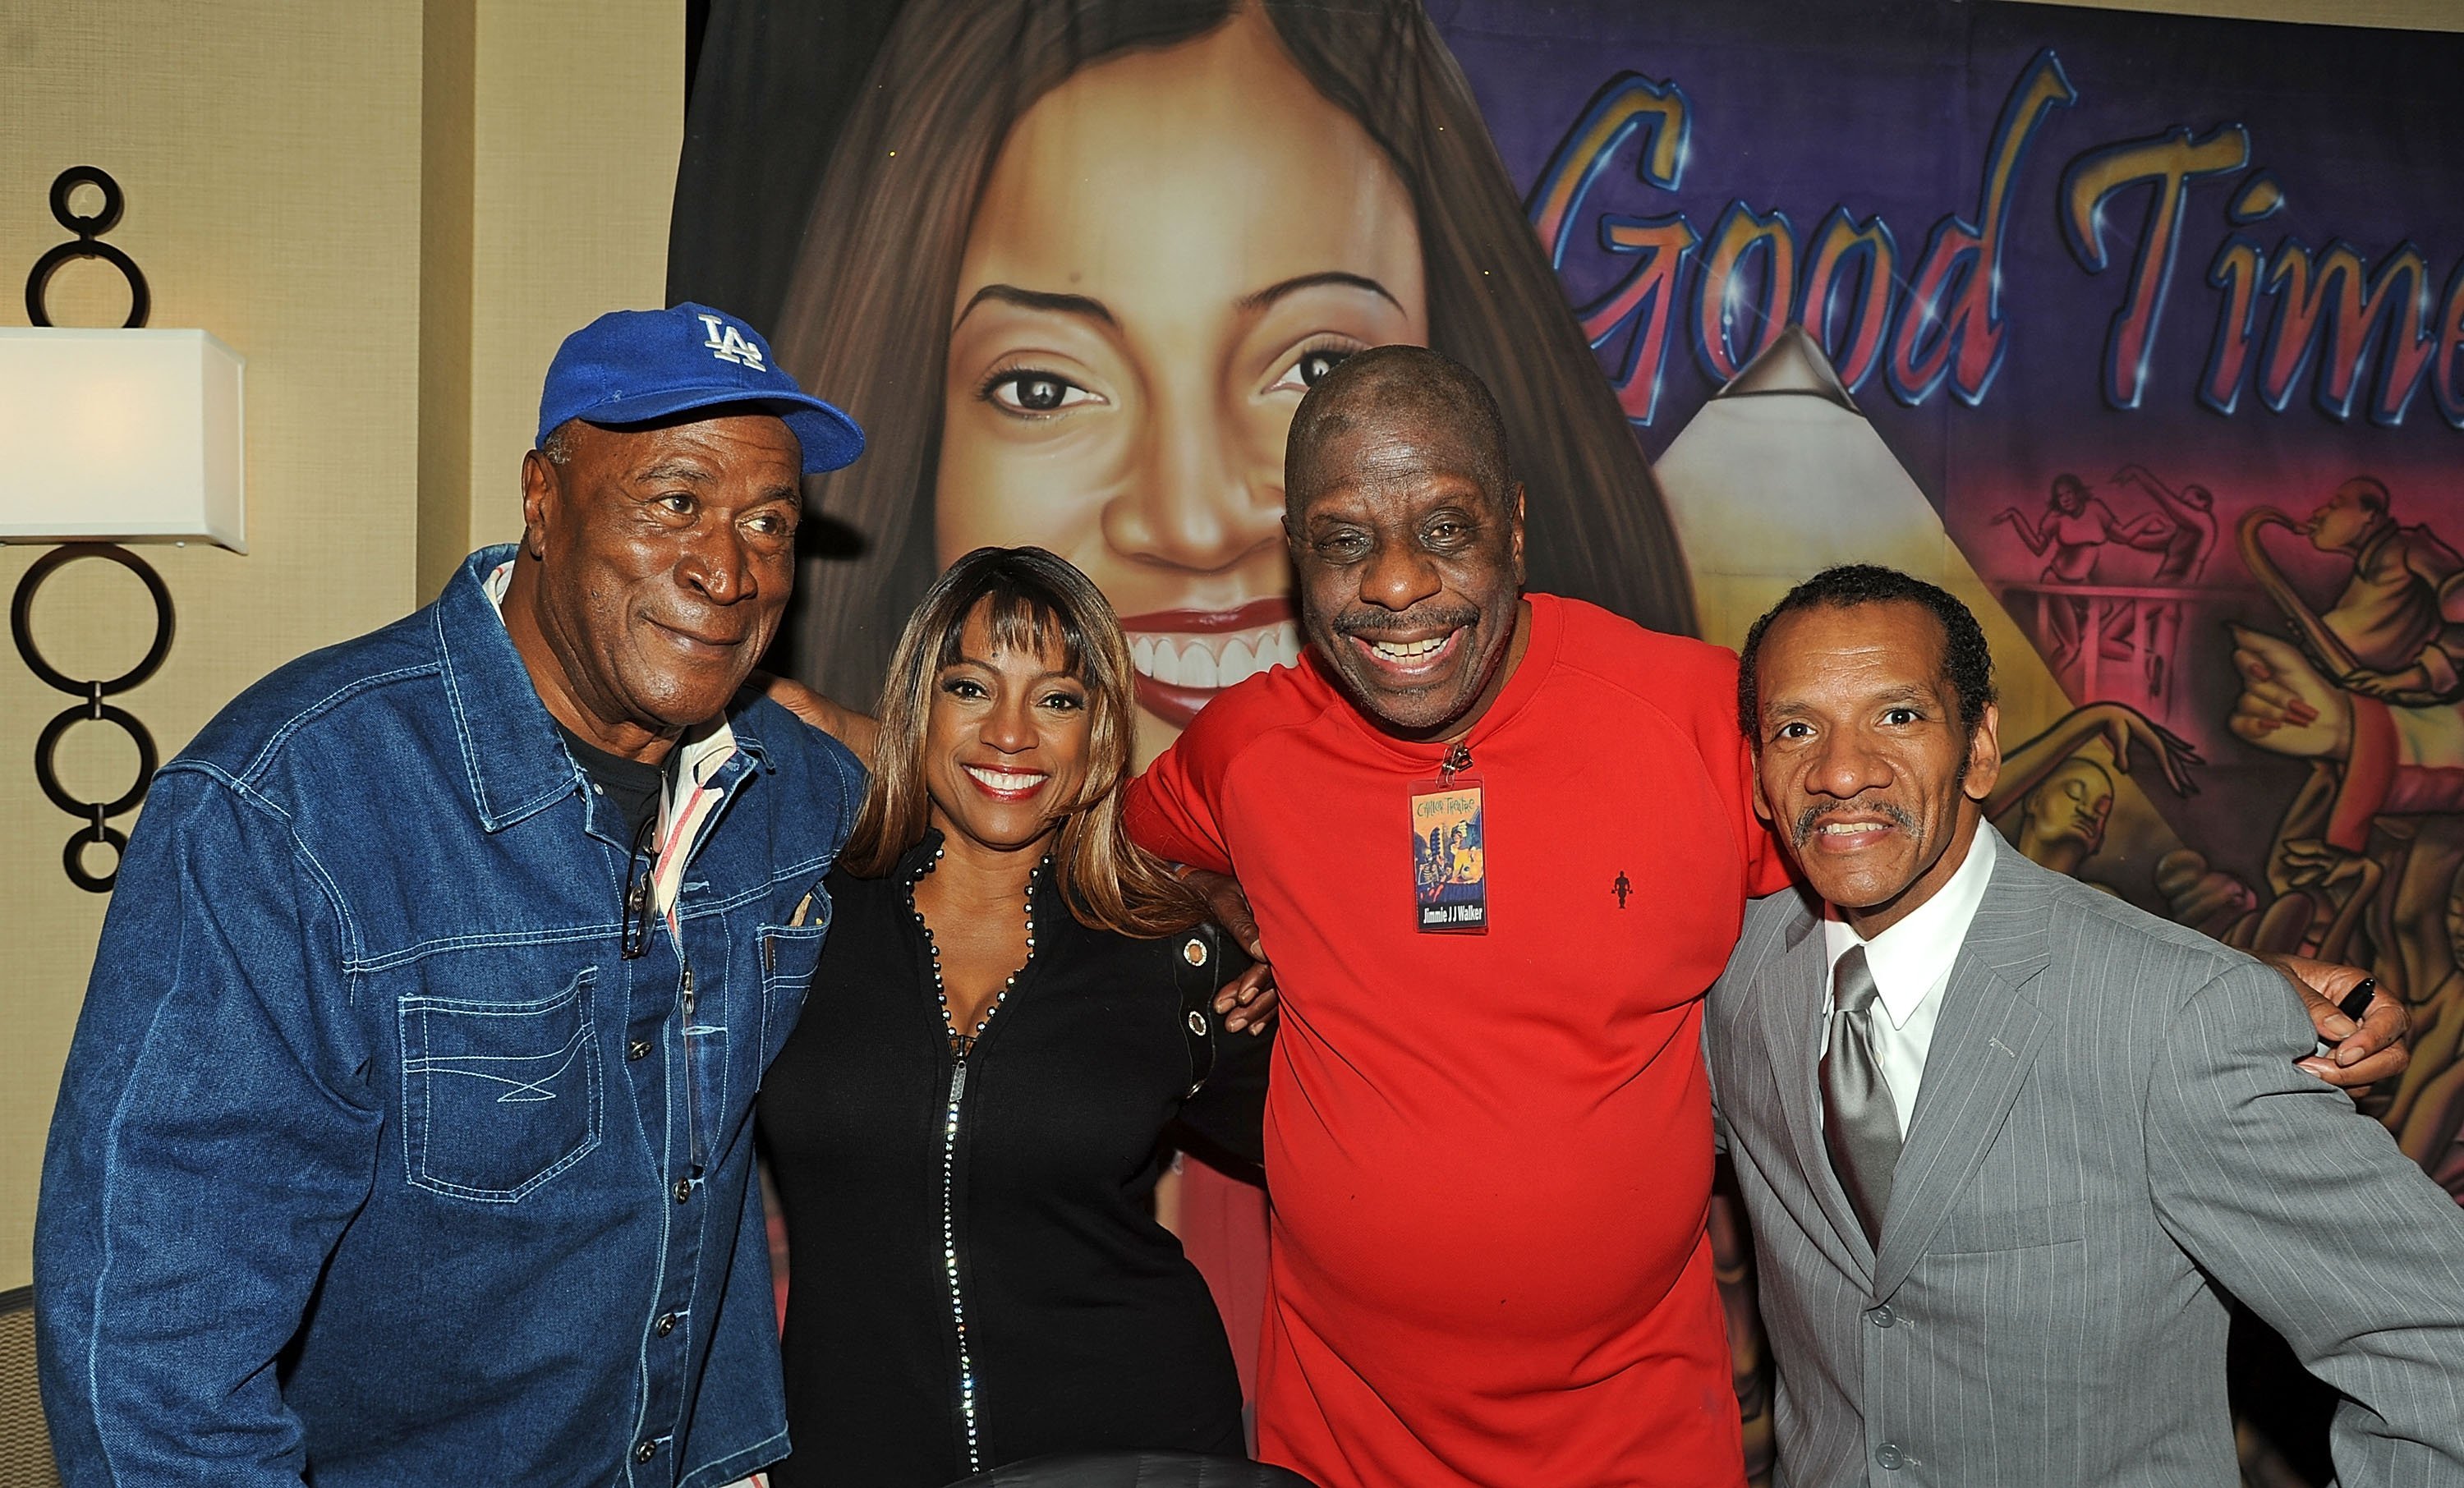 John Amos, Bern Nadette Stanis, Jimmie JJ Walker and Ralph Carter of " Good Times" reunite at Day 1 of the Chiller Theatre Expo at Sheraton Parsippany Hotel on October 24, 2014 | Photo: Getty Images